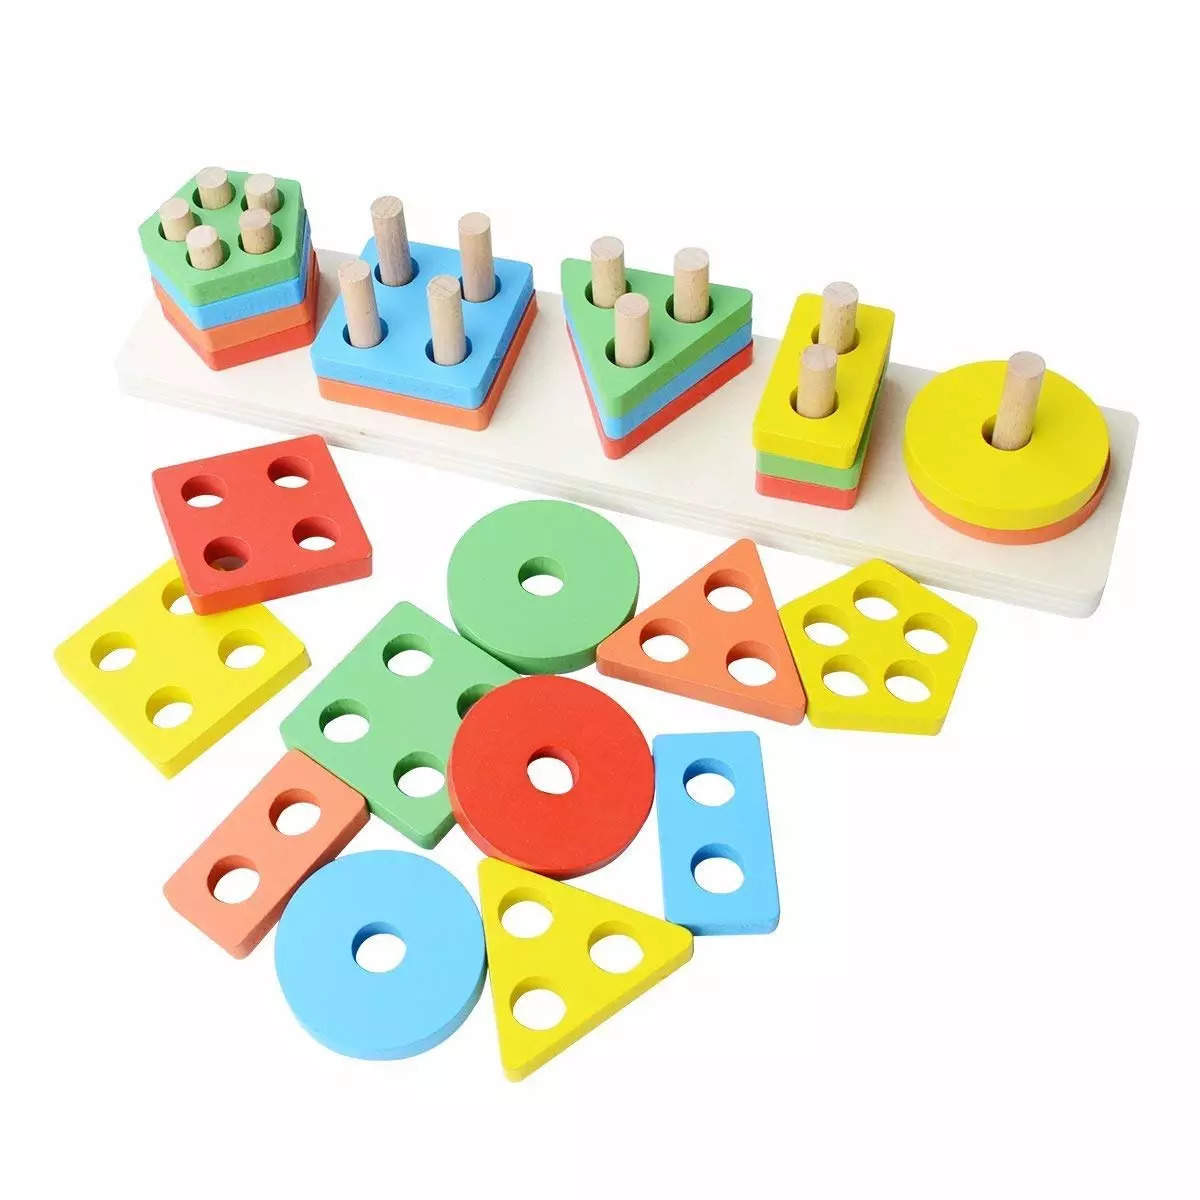 Educational Toys for Kids: Best Educational Toys for Kids in India